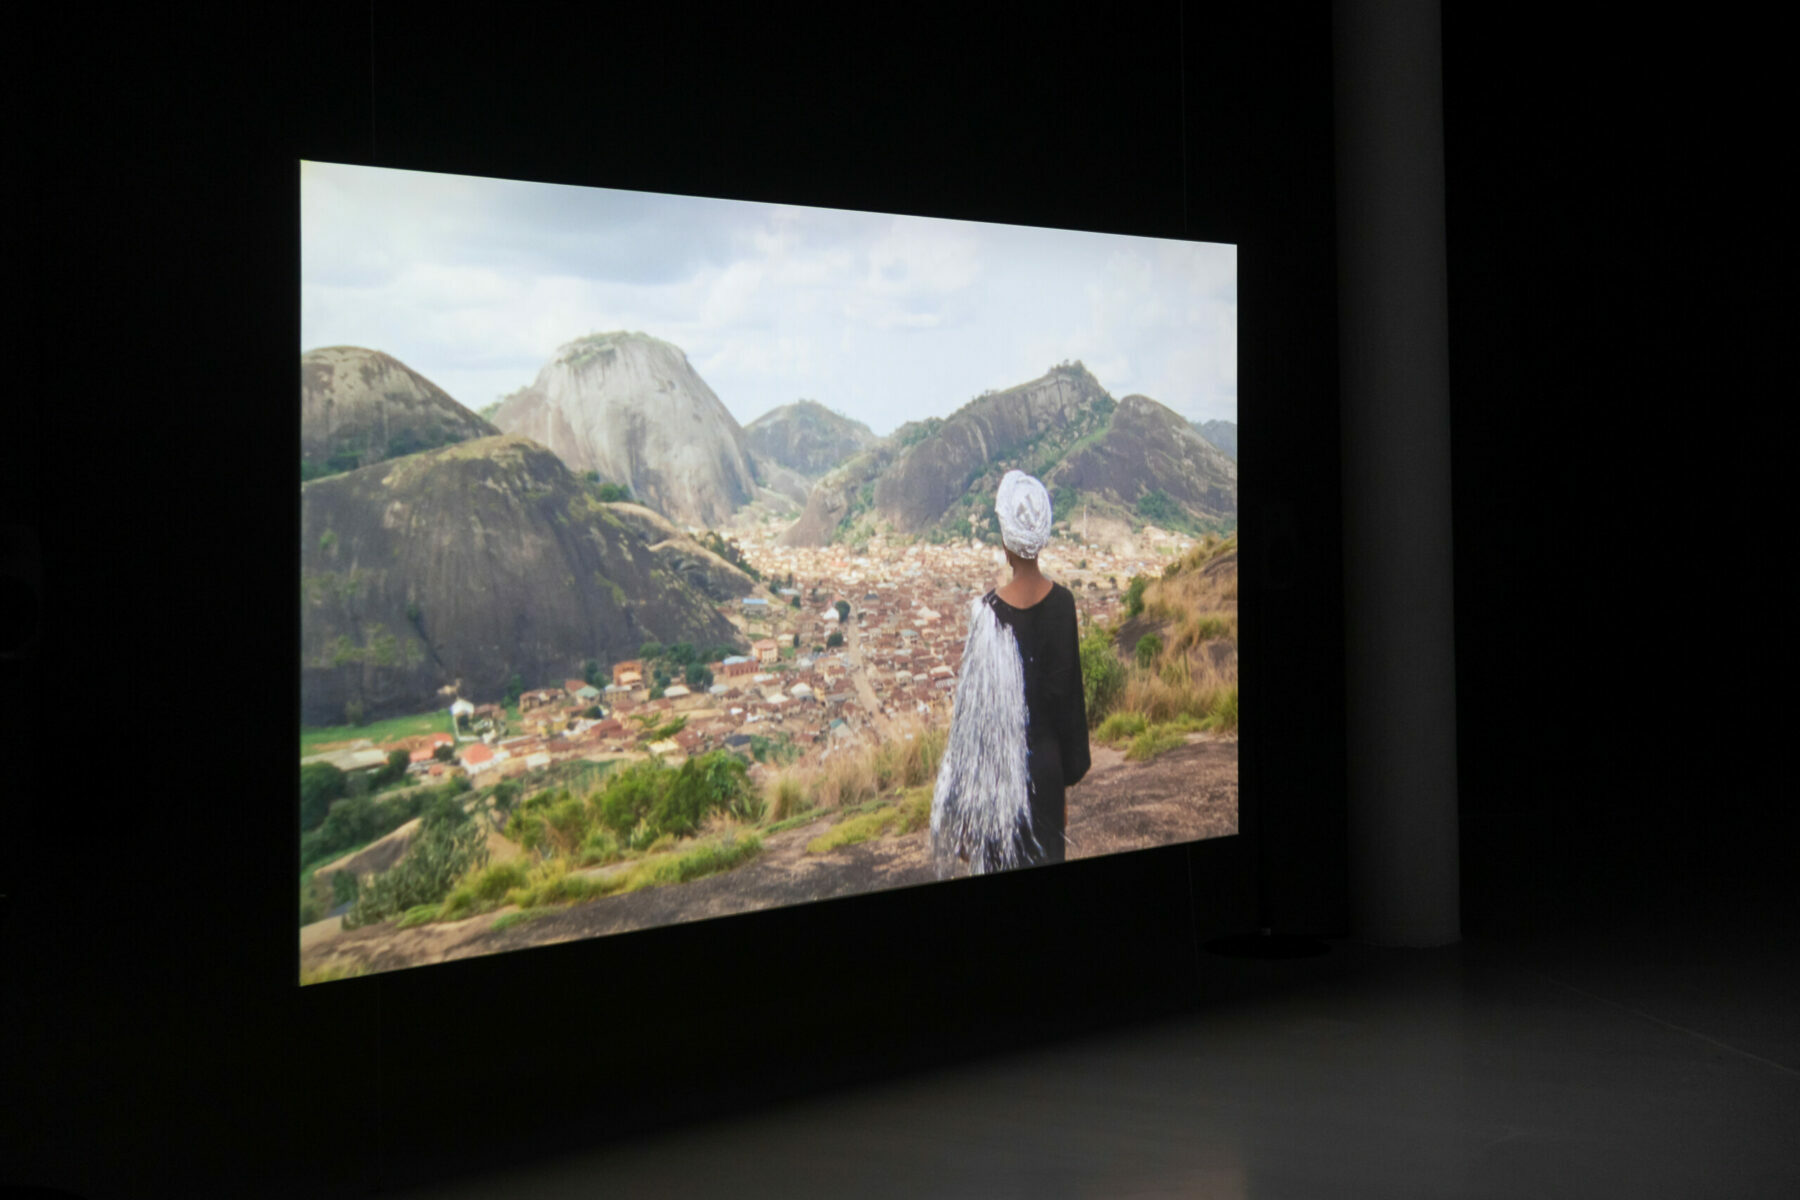 A video projection in a dark space, which shows the back view of a figure looking out onto a landscape.